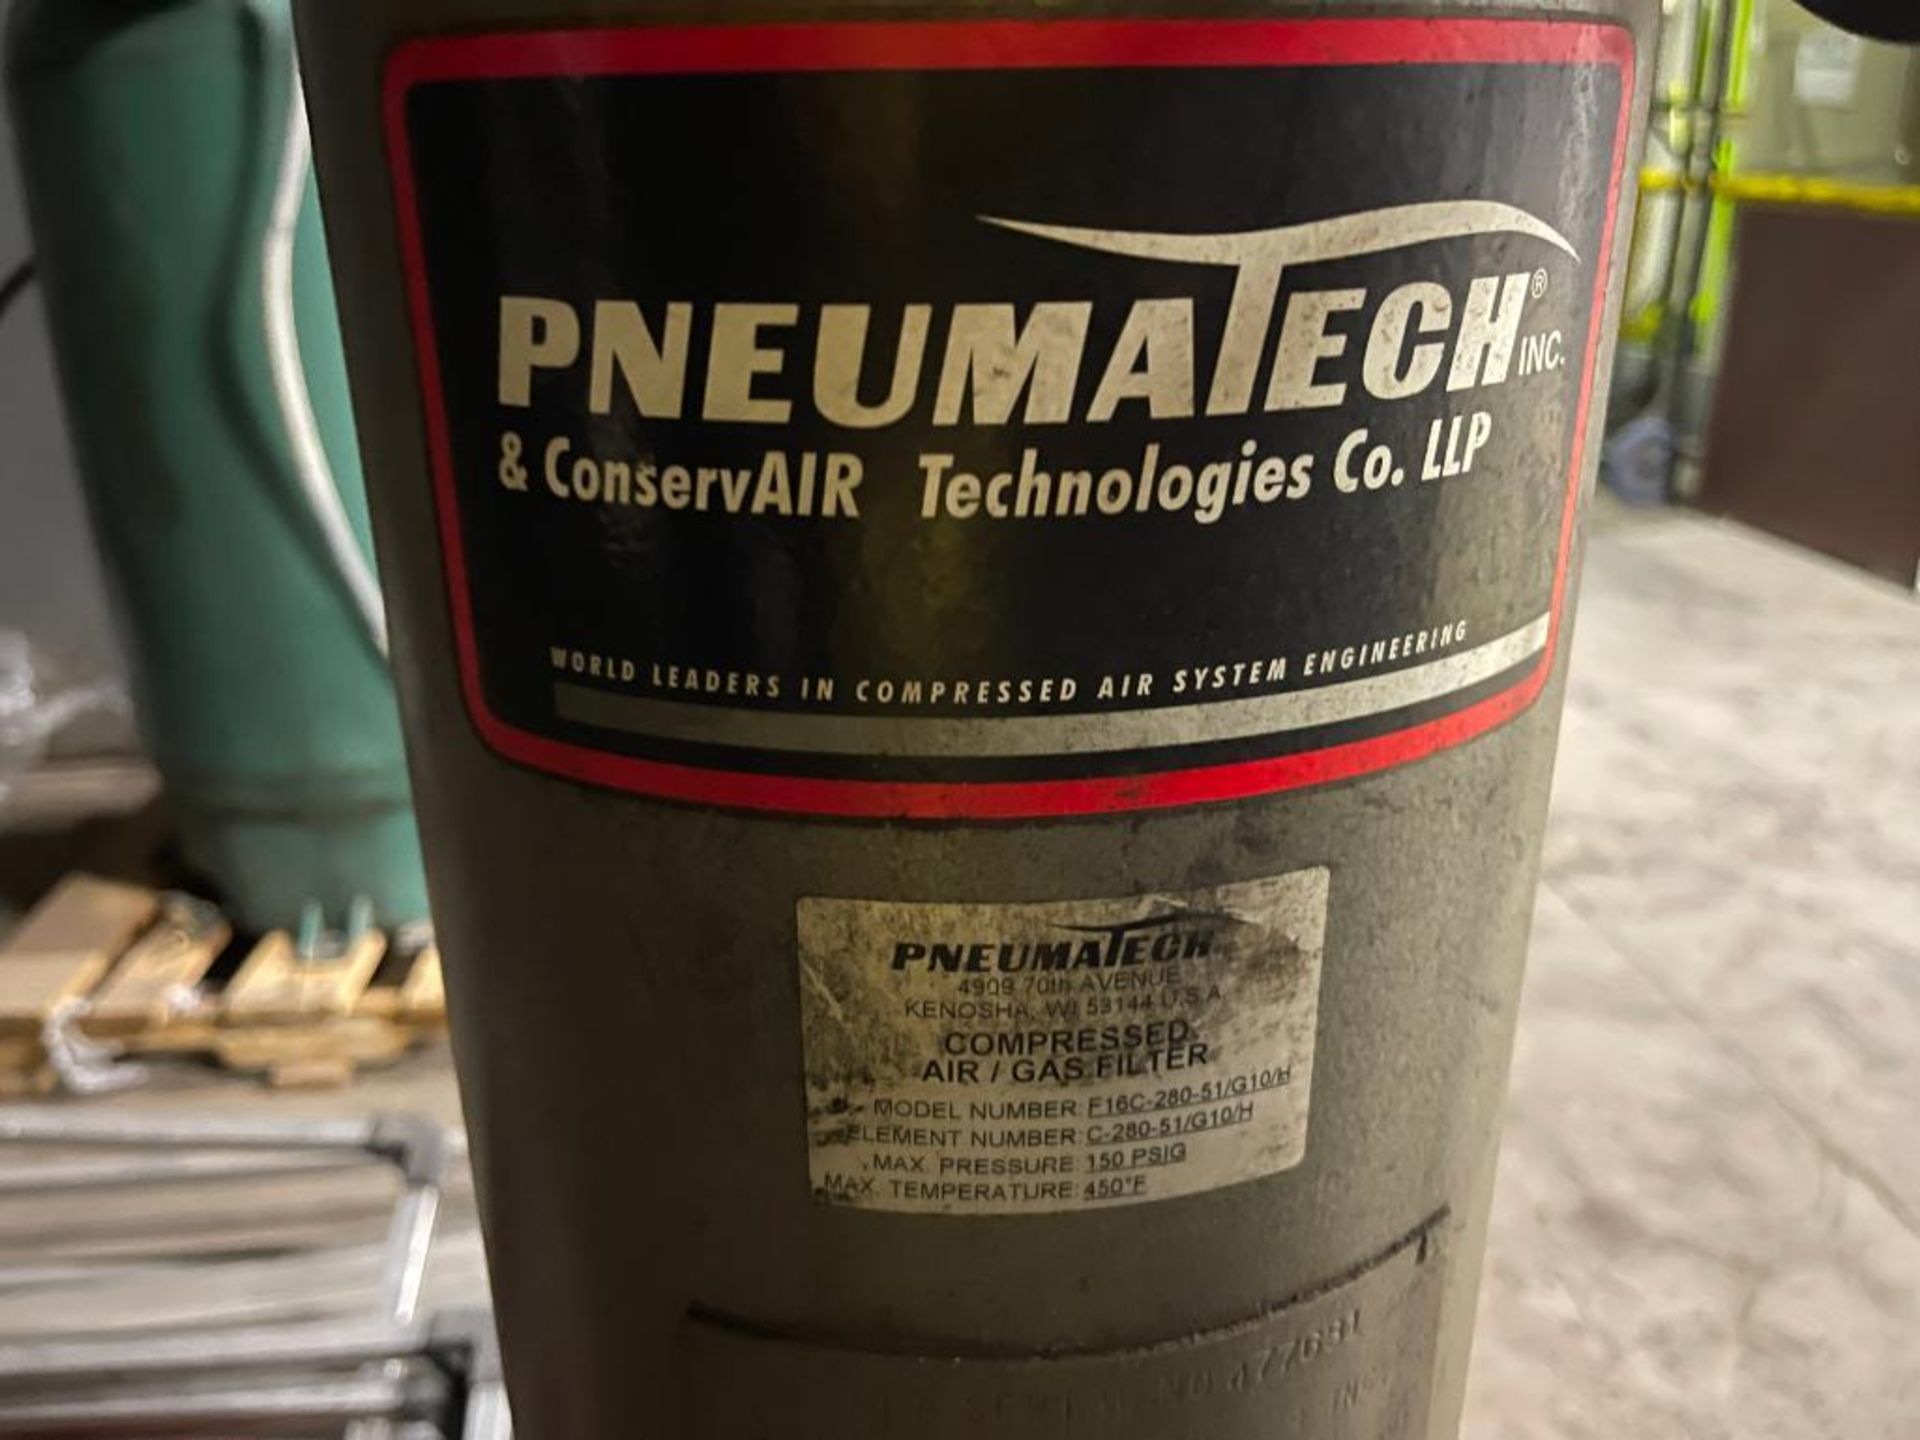 Pneumatech compressed air/gas filter - Image 3 of 4